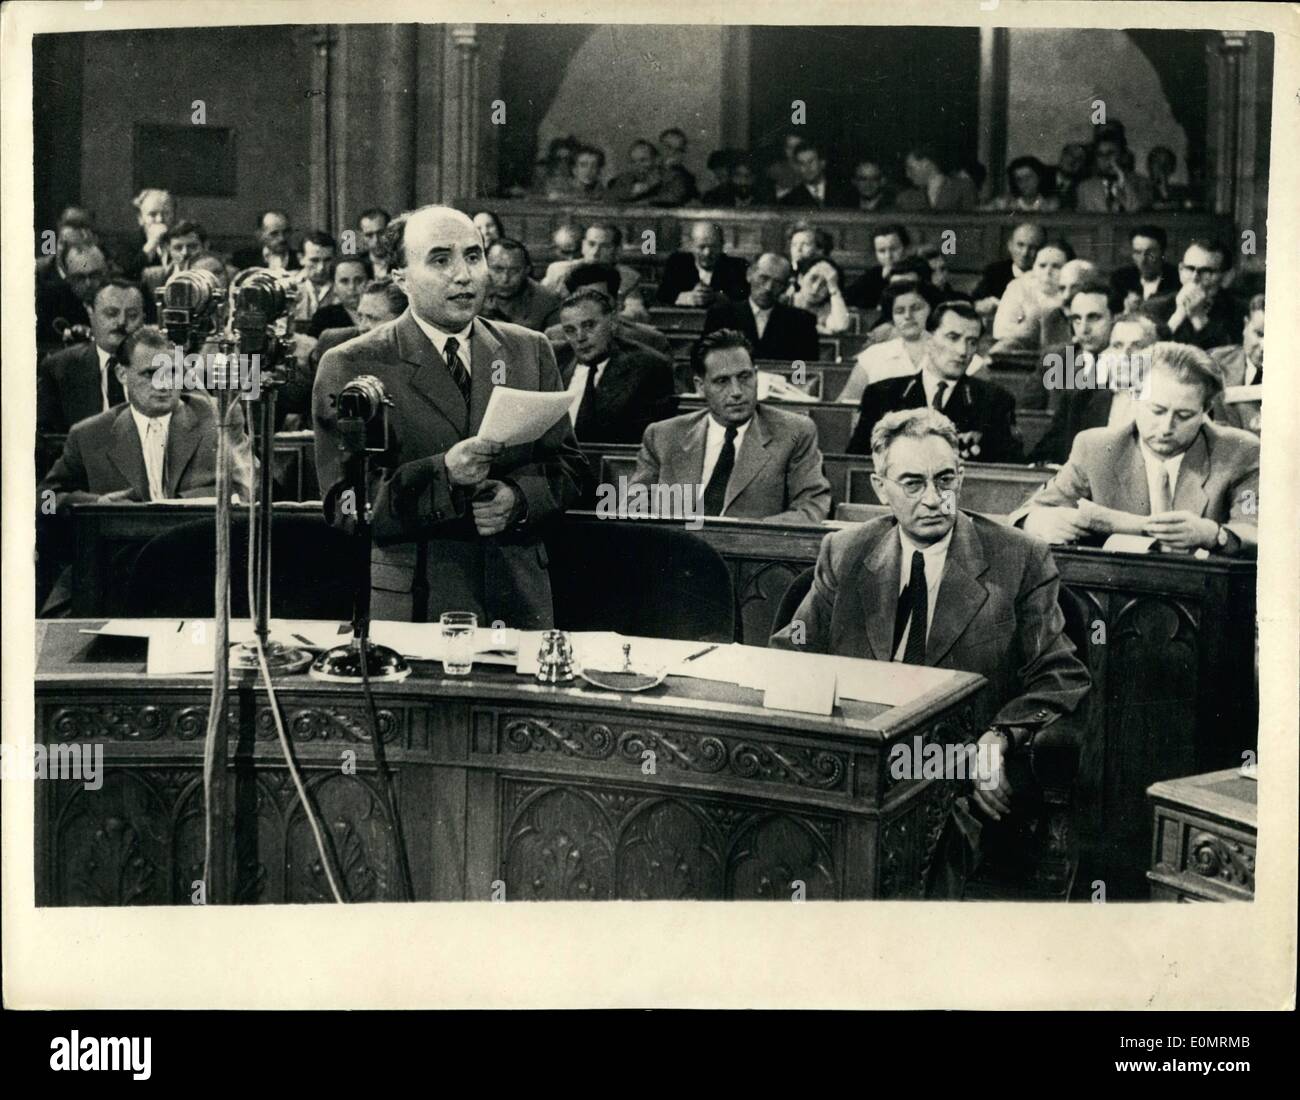 Aug. 08, 1956 - New Session of the Hungarian Parliament opened. The premier speaks. Photo Shows Premier Andras Hegedus gives his report - when he attended the recent opening of the new session of the Hugarian Parliament in Budapest. Seated beside him - to the right is Erno Gero the First Secretary of the Central Committee the Hungarian Working People's Party. Stock Photo